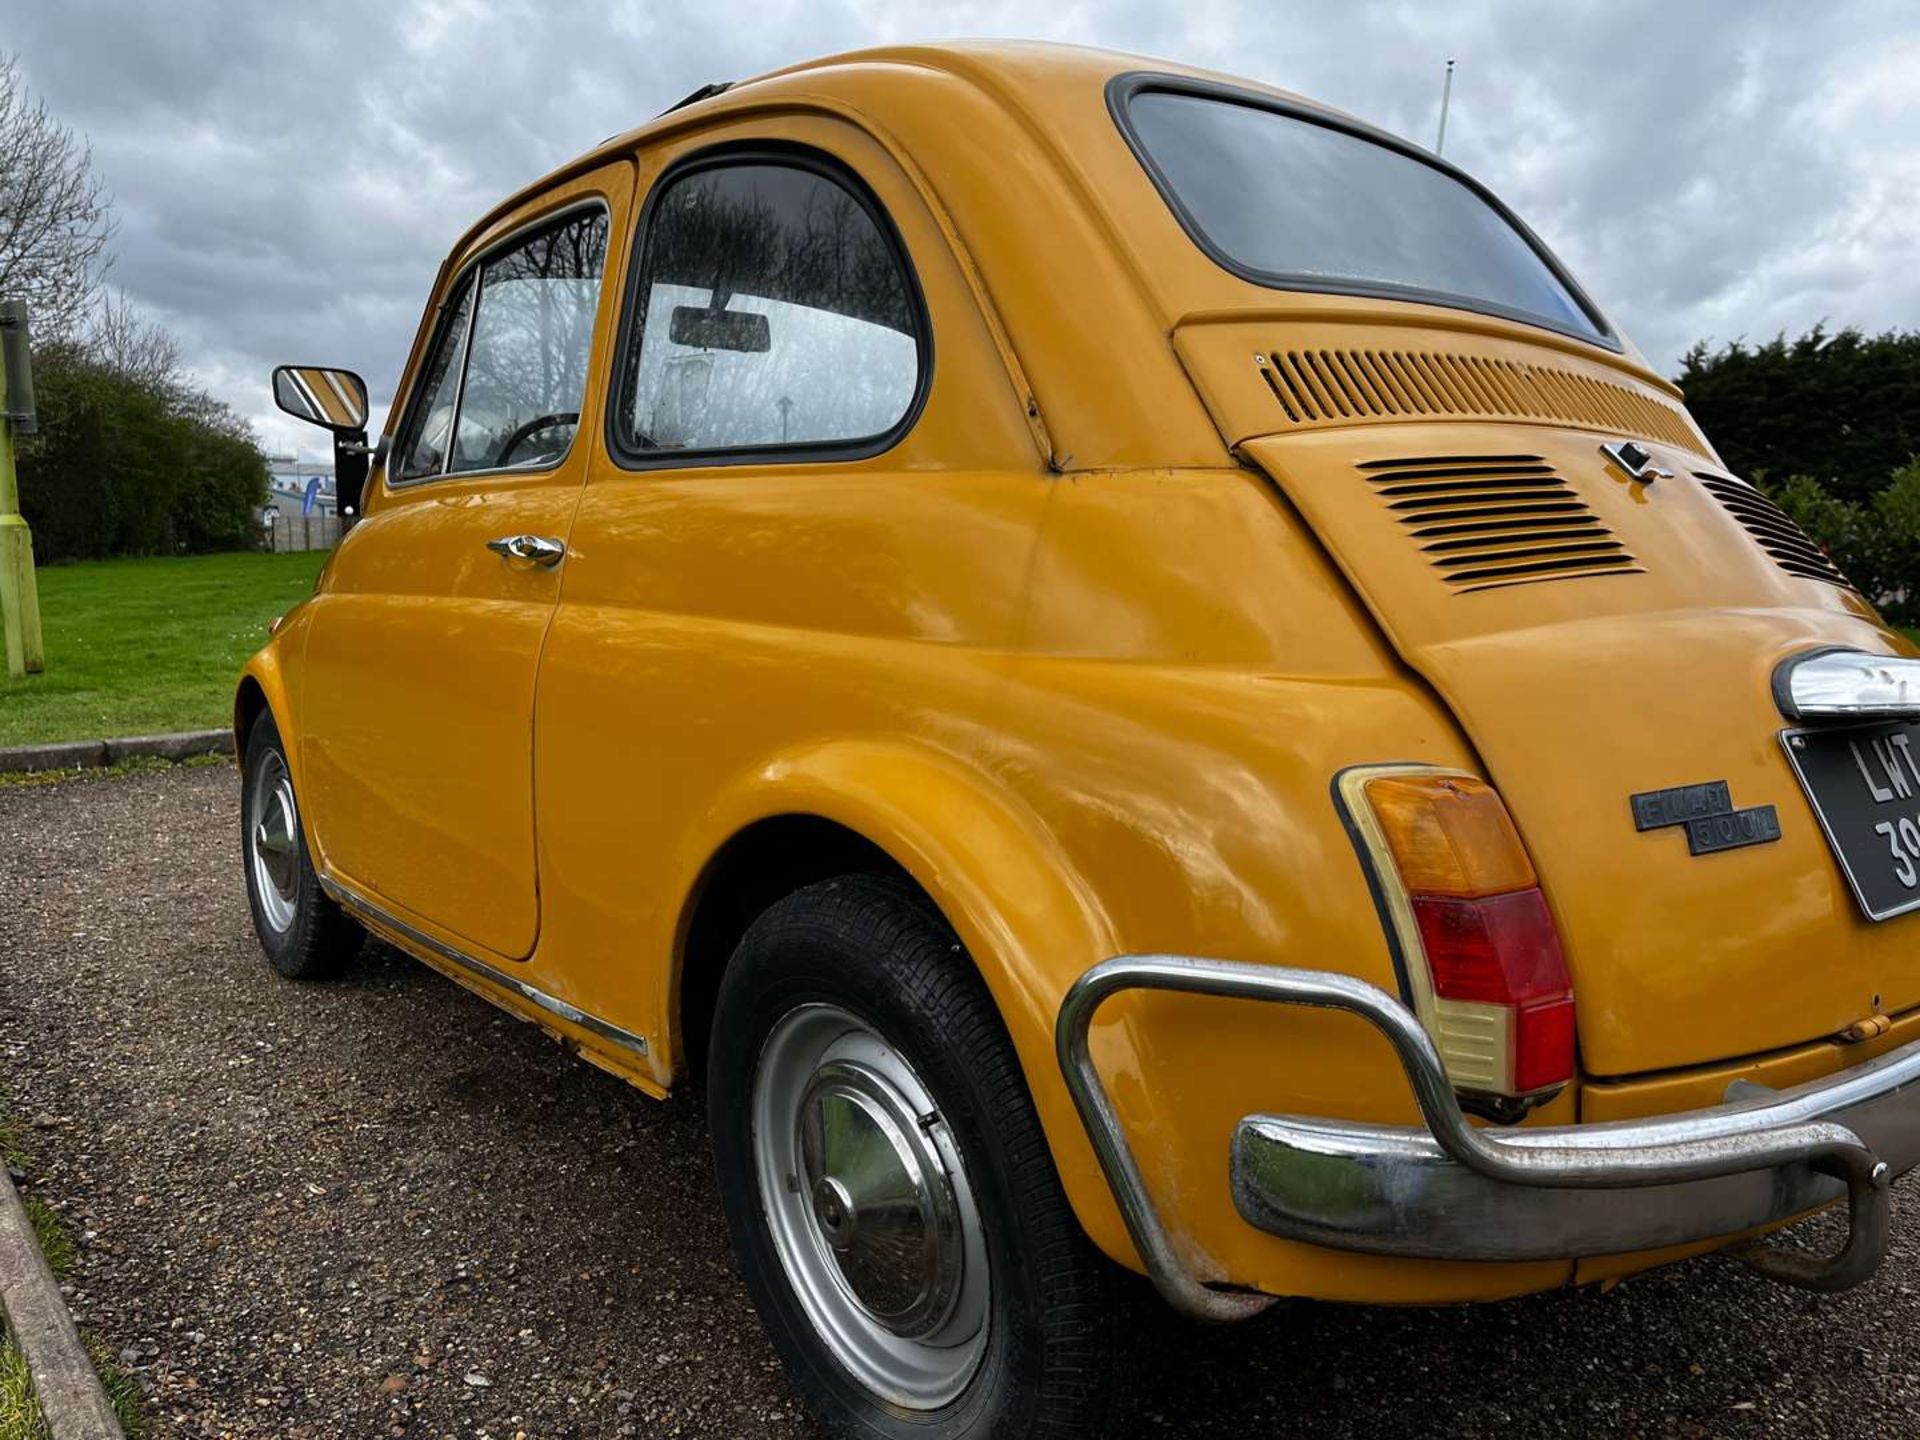 1970 FIAT 500 LHD - Image 10 of 29